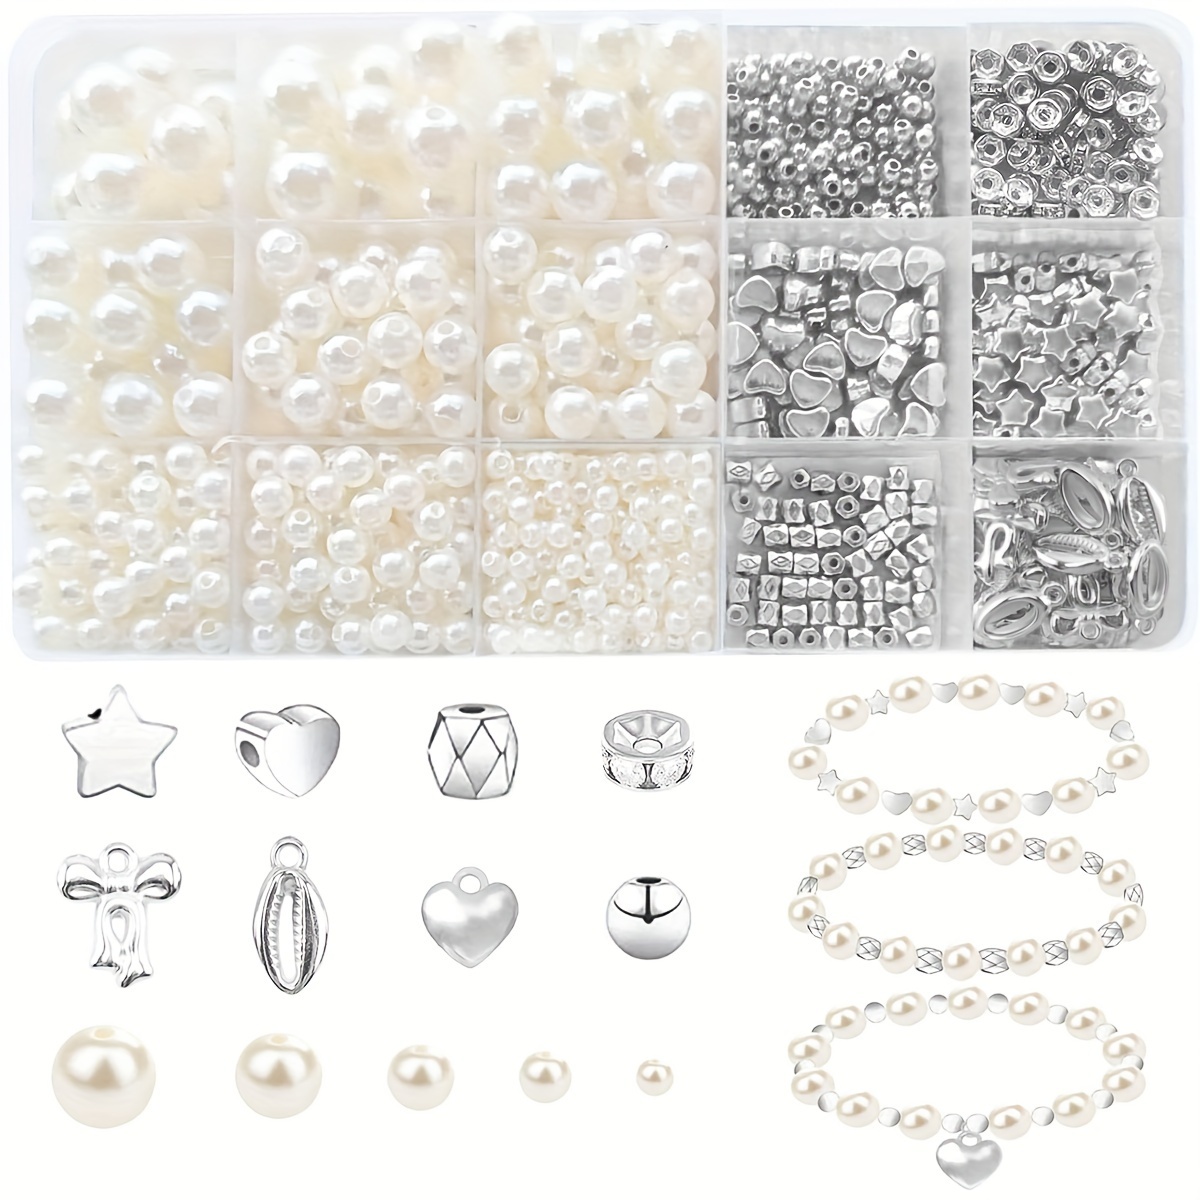 

720pcs Elegant White With Golden/silvery Ccb Assorted Plastic Spacer Beads For Jewelry Making Diy Special Bracelet Earrings Necklace Handmade Craft Supplies